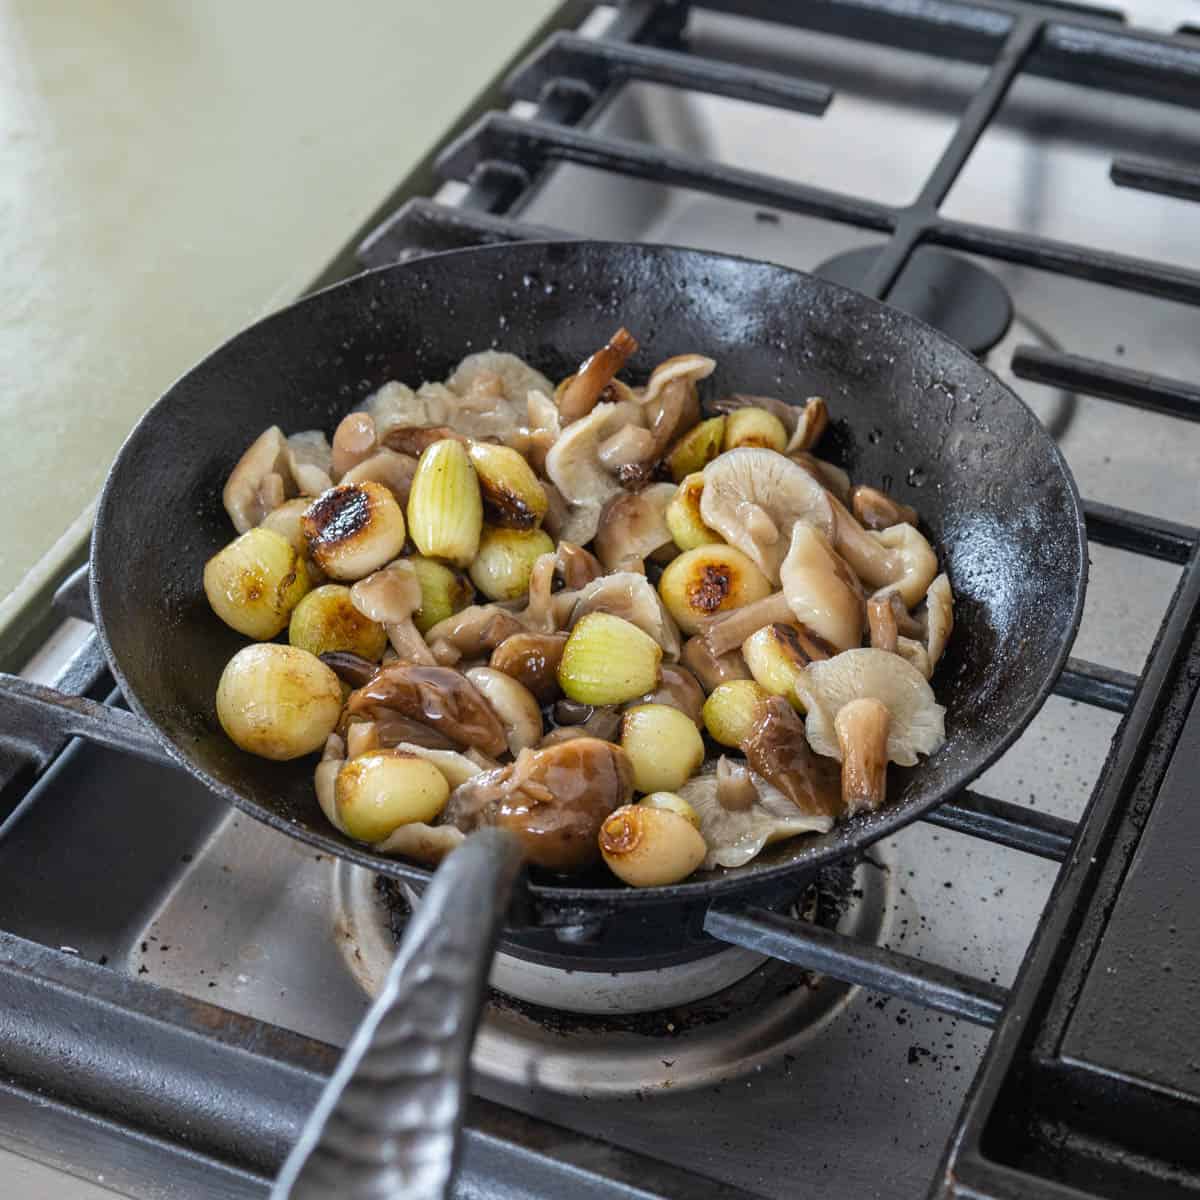 Sauteeing mushrooms and pearl onions in a pan.